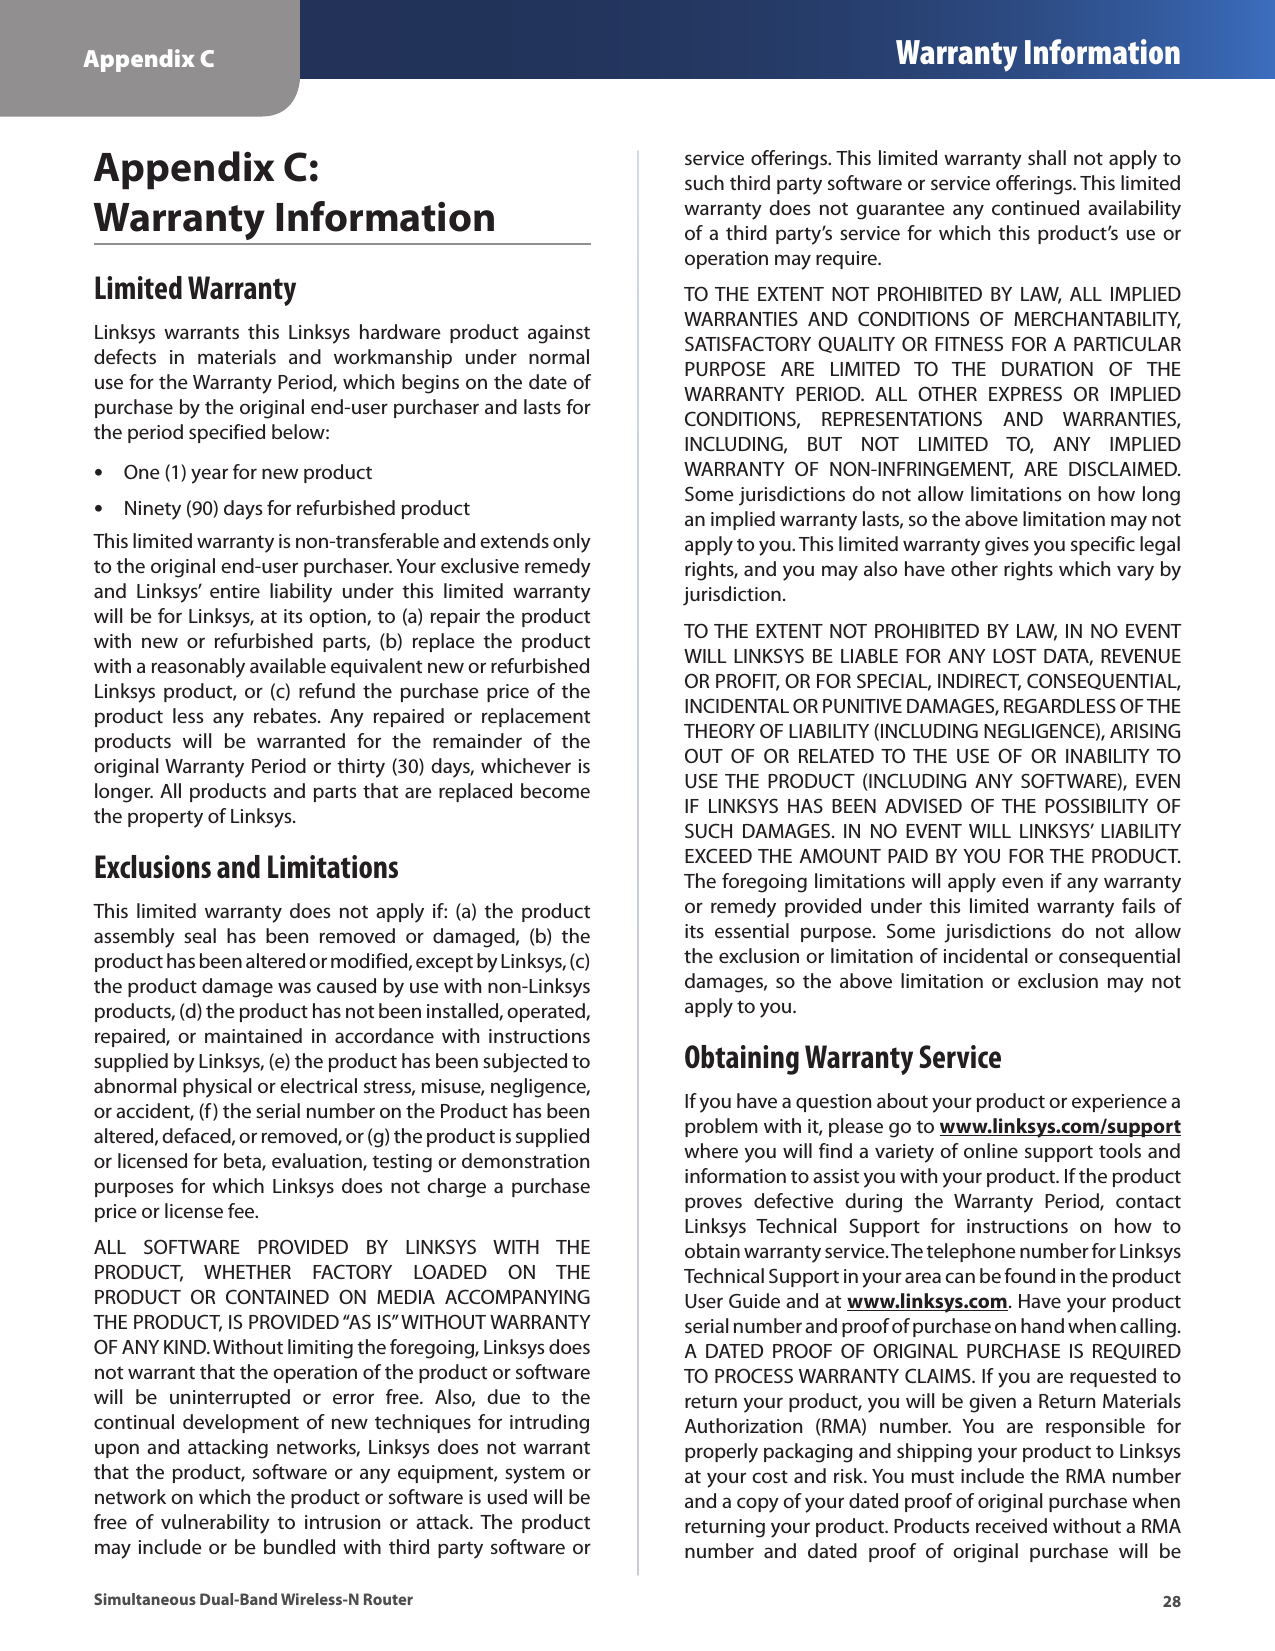 Appendix C Warranty Information28Simultaneous Dual-Band Wireless-N RouterAppendix C:  Warranty InformationLimited WarrantyLinksys  warrants  this  Linksys  hardware  product  against defects  in  materials  and  workmanship  under  normal use for the Warranty Period, which begins on the date of purchase by the original end-user purchaser and lasts for the period specified below:One (1) year for new product •Ninety (90) days for refurbished product •This limited warranty is non-transferable and extends only to the original end-user purchaser. Your exclusive remedy and  Linksys’  entire  liability  under  this  limited  warranty will be for Linksys, at its option, to (a) repair the product with  new  or  refurbished  parts,  (b)  replace  the  product with a reasonably available equivalent new or refurbished Linksys product,  or (c)  refund the  purchase price  of  the product  less  any  rebates.  Any  repaired  or  replacement products  will  be  warranted  for  the  remainder  of  the original Warranty Period or thirty (30) days, whichever is longer. All products and parts that are replaced become the property of Linksys.Exclusions and LimitationsThis  limited  warranty  does  not  apply  if:  (a) the  product assembly  seal  has  been  removed  or  damaged,  (b)  the product has been altered or modified, except by Linksys, (c) the product damage was caused by use with non-Linksys products, (d) the product has not been installed, operated, repaired,  or  maintained  in  accordance  with  instructions supplied by Linksys, (e) the product has been subjected to abnormal physical or electrical stress, misuse, negligence, or accident, (f) the serial number on the Product has been altered, defaced, or removed, or (g) the product is supplied or licensed for beta, evaluation, testing or demonstration purposes for which  Linksys does not  charge  a purchase price or license fee.ALL  SOFTWARE  PROVIDED  BY  LINKSYS  WITH  THE PRODUCT,  WHETHER  FACTORY  LOADED  ON  THE PRODUCT  OR  CONTAINED  ON  MEDIA  ACCOMPANYING THE PRODUCT, IS PROVIDED “AS IS” WITHOUT WARRANTY OF ANY KIND. Without limiting the foregoing, Linksys does not warrant that the operation of the product or software will  be  uninterrupted  or  error  free.  Also,  due  to  the continual development of new techniques for intruding upon and  attacking  networks, Linksys does  not warrant that the product, software or any equipment, system or network on which the product or software is used will be free  of  vulnerability  to  intrusion  or  attack.  The  product may include or be bundled with third party software or service offerings. This limited warranty shall not apply to such third party software or service offerings. This limited warranty  does  not  guarantee  any  continued  availability of a  third party’s  service  for  which this product’s use  or operation may require. TO THE  EXTENT  NOT  PROHIBITED  BY  LAW,  ALL  IMPLIED WARRANTIES  AND  CONDITIONS  OF  MERCHANTABILITY, SATISFACTORY QUALITY OR FITNESS FOR A  PARTICULAR PURPOSE  ARE  LIMITED  TO  THE  DURATION  OF  THE WARRANTY  PERIOD.  ALL  OTHER  EXPRESS  OR  IMPLIED CONDITIONS,  REPRESENTATIONS  AND  WARRANTIES, INCLUDING,  BUT  NOT  LIMITED  TO,  ANY  IMPLIED WARRANTY  OF  NON-INFRINGEMENT,  ARE  DISCLAIMED. Some jurisdictions do not allow limitations on how long an implied warranty lasts, so the above limitation may not apply to you. This limited warranty gives you specific legal rights, and you may also have other rights which vary by jurisdiction.TO THE  EXTENT NOT PROHIBITED BY LAW, IN NO EVENT WILL LINKSYS BE LIABLE FOR ANY LOST DATA, REVENUE OR PROFIT, OR FOR SPECIAL, INDIRECT, CONSEQUENTIAL, INCIDENTAL OR PUNITIVE DAMAGES, REGARDLESS OF THE THEORY OF LIABILITY (INCLUDING NEGLIGENCE), ARISING OUT  OF  OR  RELATED  TO  THE  USE  OF  OR  INABILITY  TO USE THE  PRODUCT  (INCLUDING  ANY  SOFTWARE),  EVEN IF  LINKSYS  HAS  BEEN  ADVISED  OF THE  POSSIBILITY  OF SUCH  DAMAGES.  IN  NO  EVENT WILL  LINKSYS’  LIABILITY EXCEED THE  AMOUNT PAID  BY YOU FOR THE PRODUCT. The foregoing limitations will apply even if any warranty or  remedy provided  under  this  limited  warranty  fails of its  essential  purpose.  Some  jurisdictions  do  not  allow the exclusion or limitation of incidental or consequential damages,  so  the  above  limitation  or  exclusion  may  not apply to you.Obtaining Warranty ServiceIf you have a question about your product or experience a problem with it, please go to www.linksys.com/support where you will find a variety of online support tools and information to assist you with your product. If the product proves  defective  during  the  Warranty  Period,  contact Linksys  Technical  Support  for  instructions  on  how  to obtain warranty service. The telephone number for Linksys Technical Support in your area can be found in the product User Guide and at www.linksys.com. Have your product serial number and proof of purchase on hand when calling. A  DATED  PROOF  OF  ORIGINAL  PURCHASE  IS  REQUIRED TO PROCESS WARRANTY CLAIMS. If you are requested to return your product, you will be given a Return Materials Authorization  (RMA)  number.  You  are  responsible  for properly packaging and shipping your product to Linksys at your cost and risk. You must include the RMA number and a copy of your dated proof of original purchase when returning your product. Products received without a RMA number  and  dated  proof  of  original  purchase  will  be 